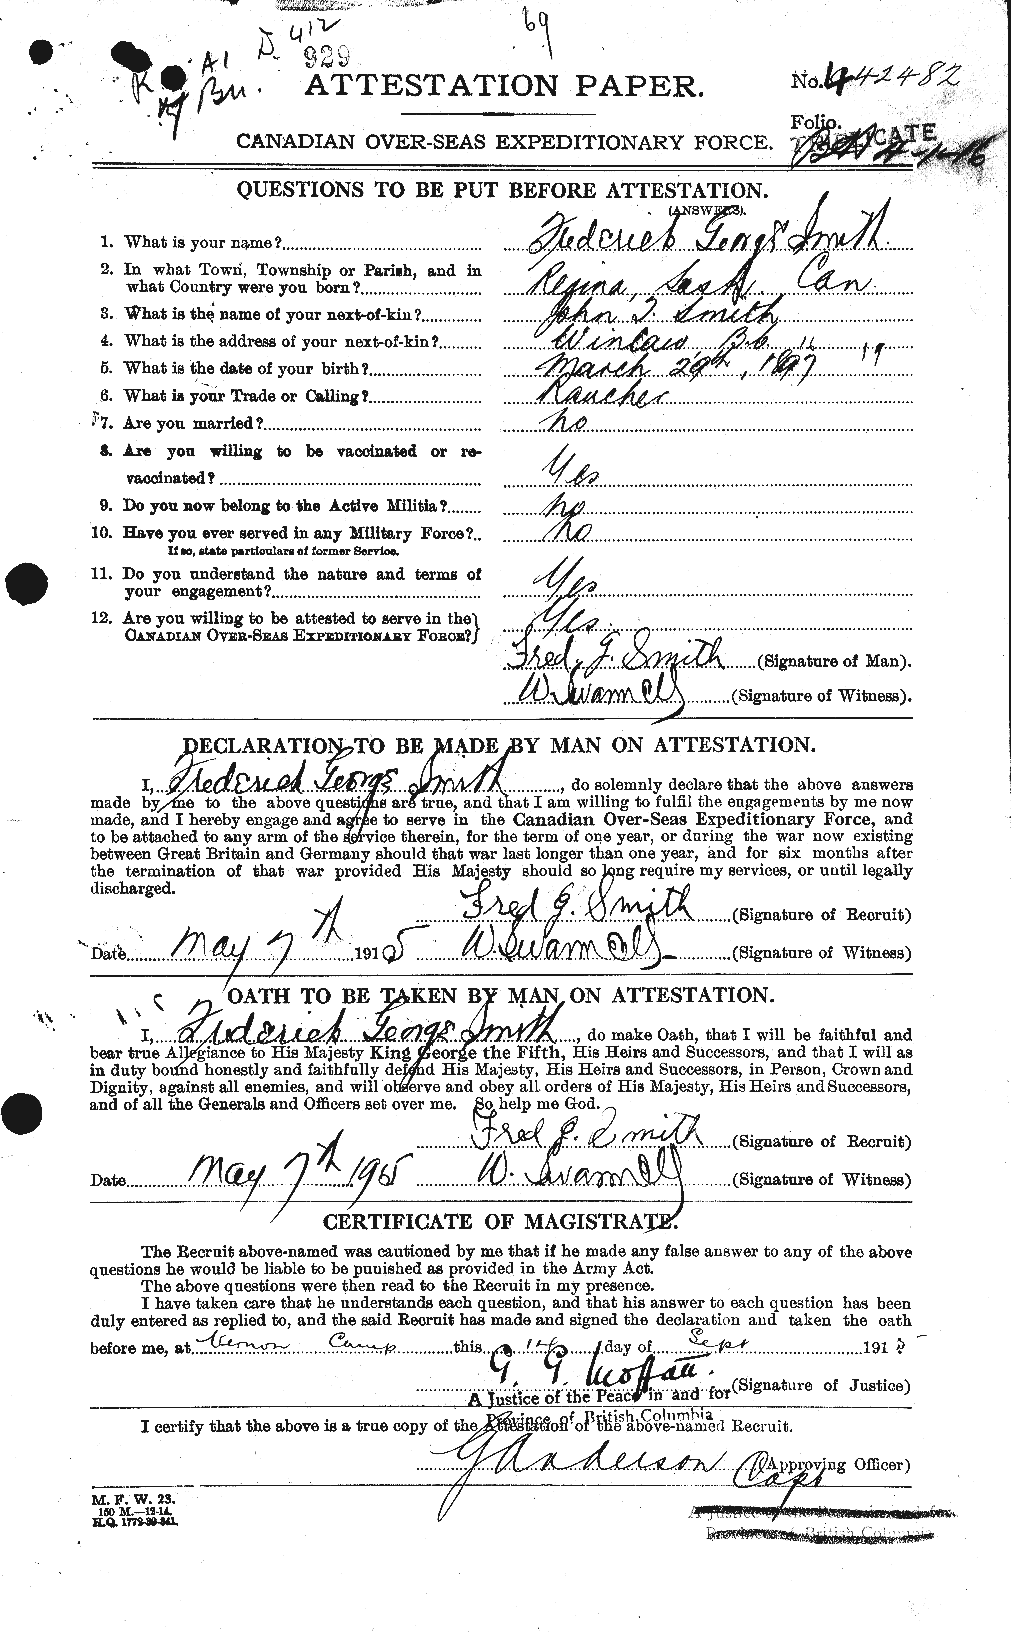 Personnel Records of the First World War - CEF 103709a